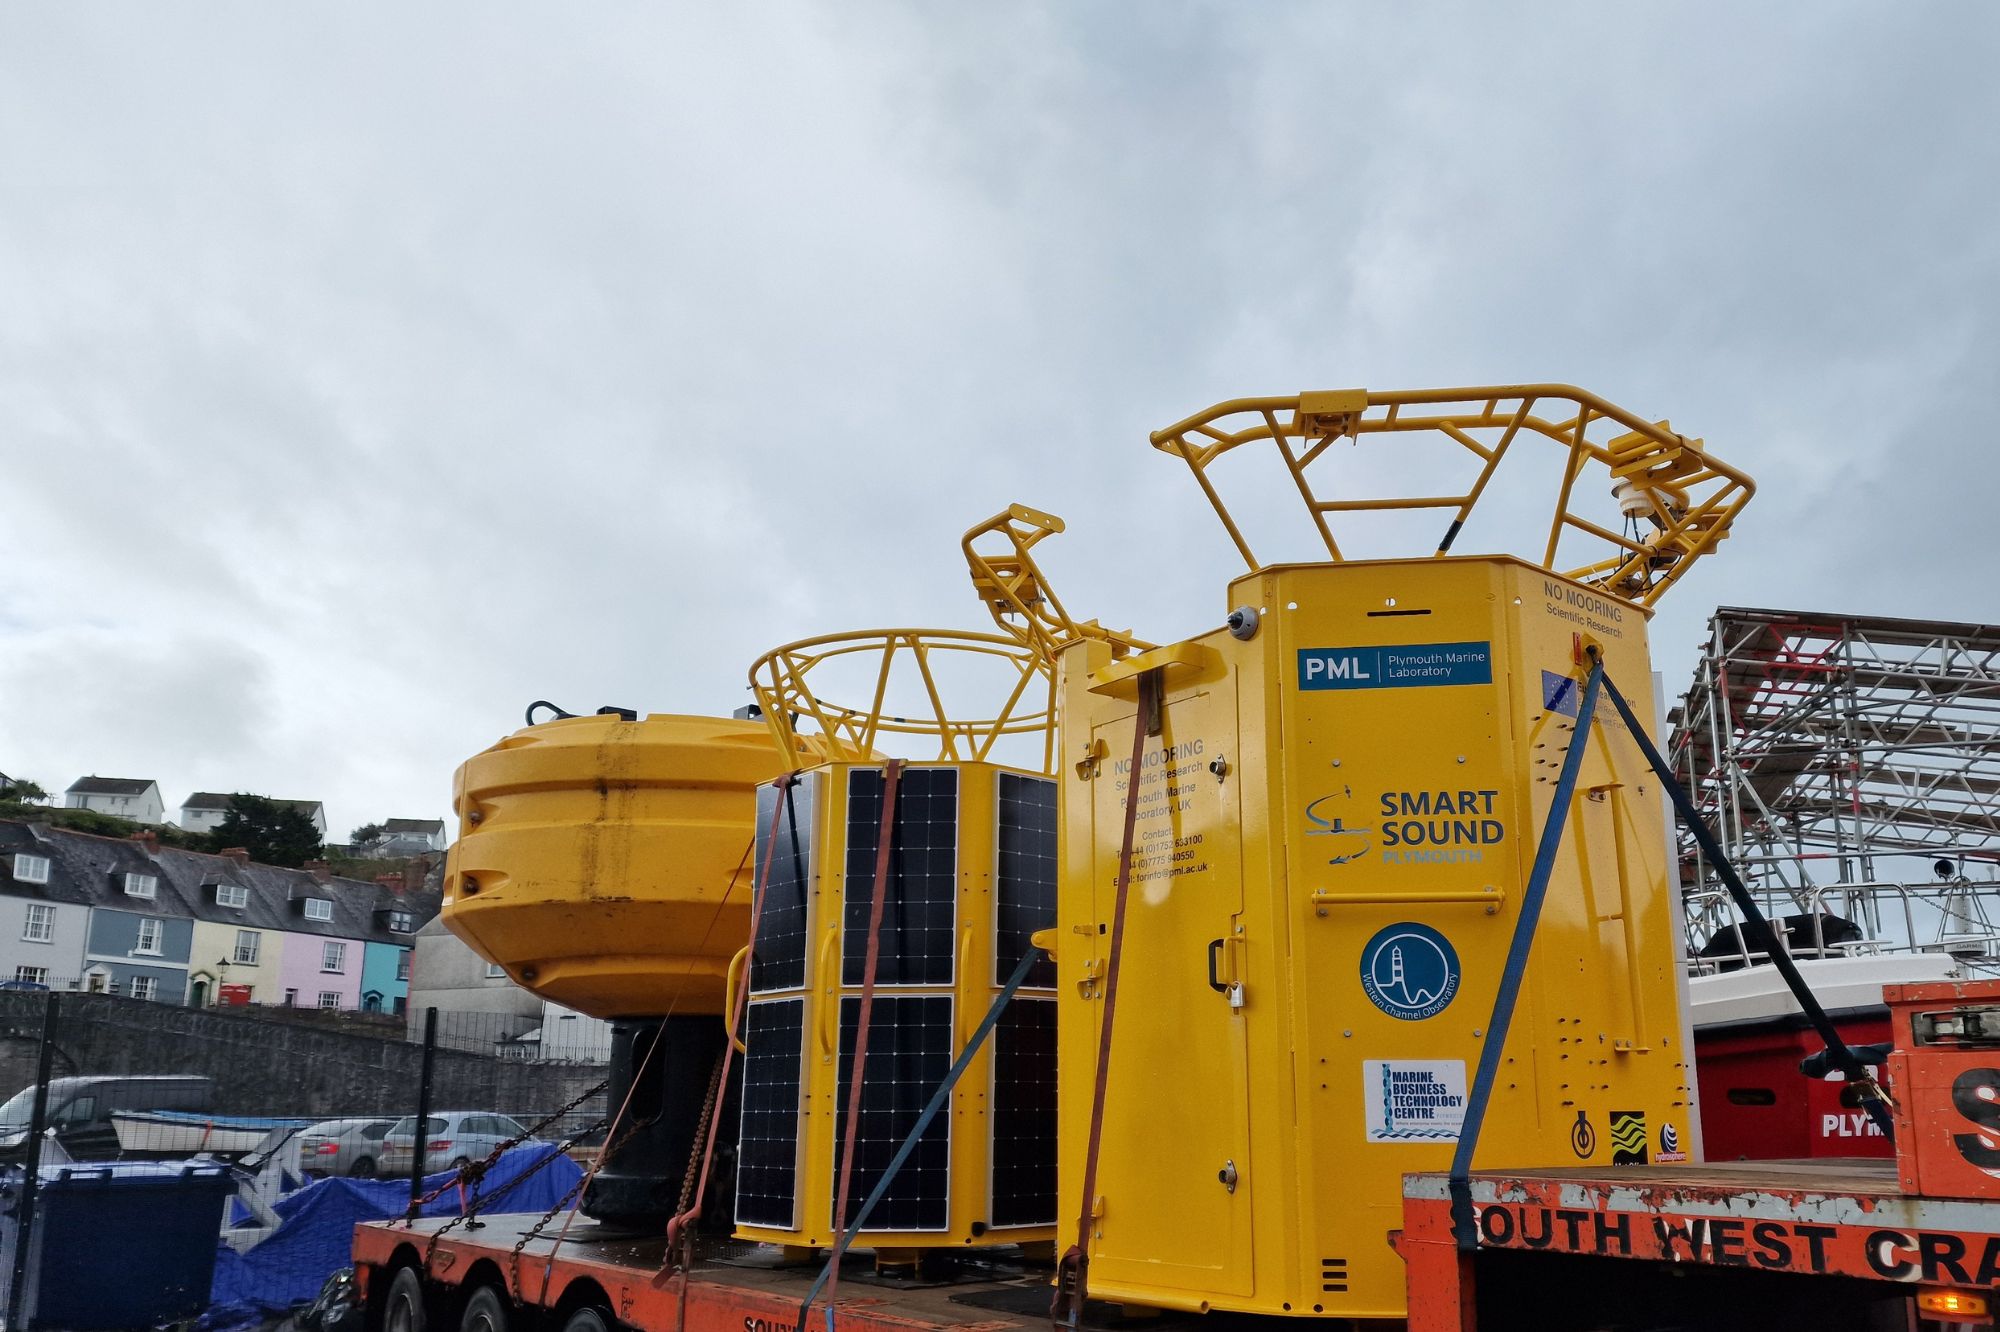 Above: Pictured at the front is our L4 autonomous buoy ‘tower’, and right behind it is our brand-new APICS autonomous buoy tower and its body..